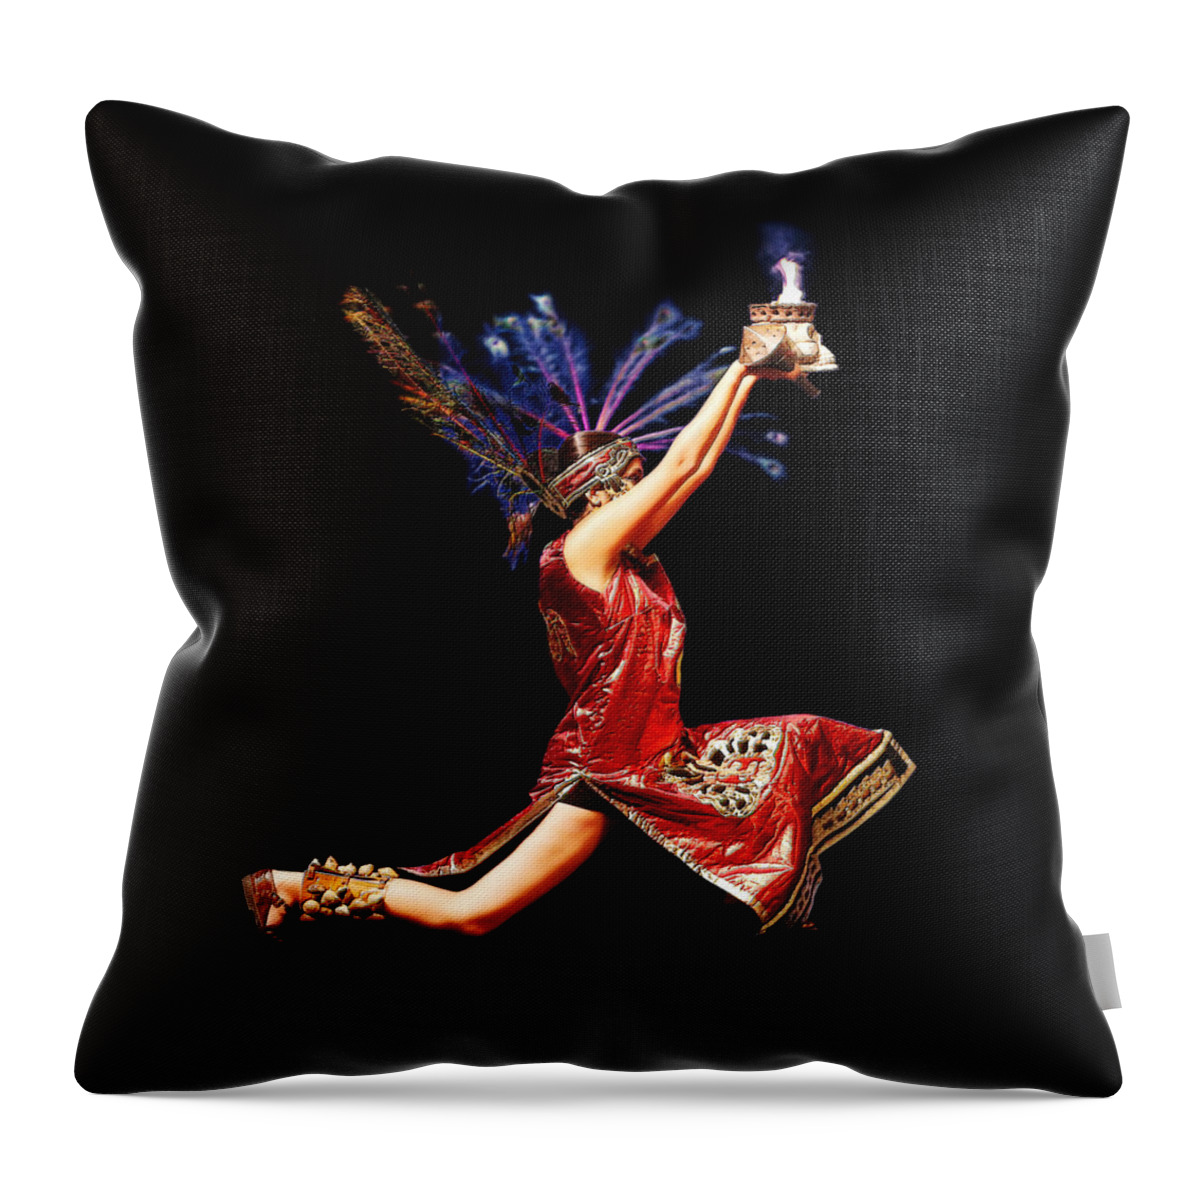 Fire Throw Pillow featuring the photograph Fire Dancer by Cindy Singleton